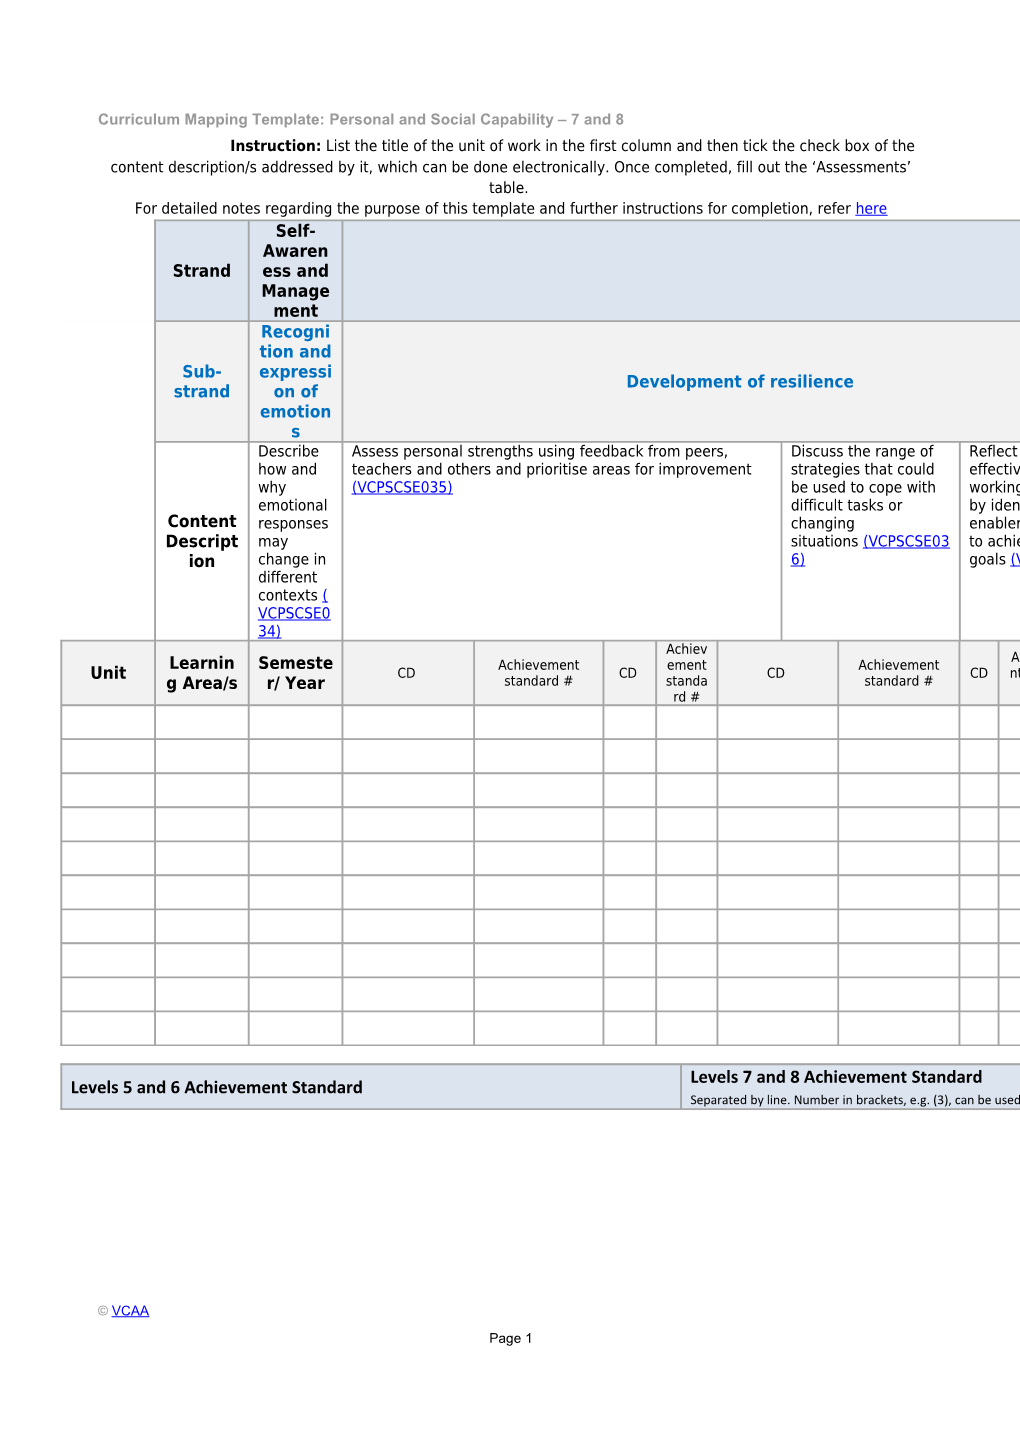 Curriculum Mapping Template: Personal and Social Capability 7 and 8